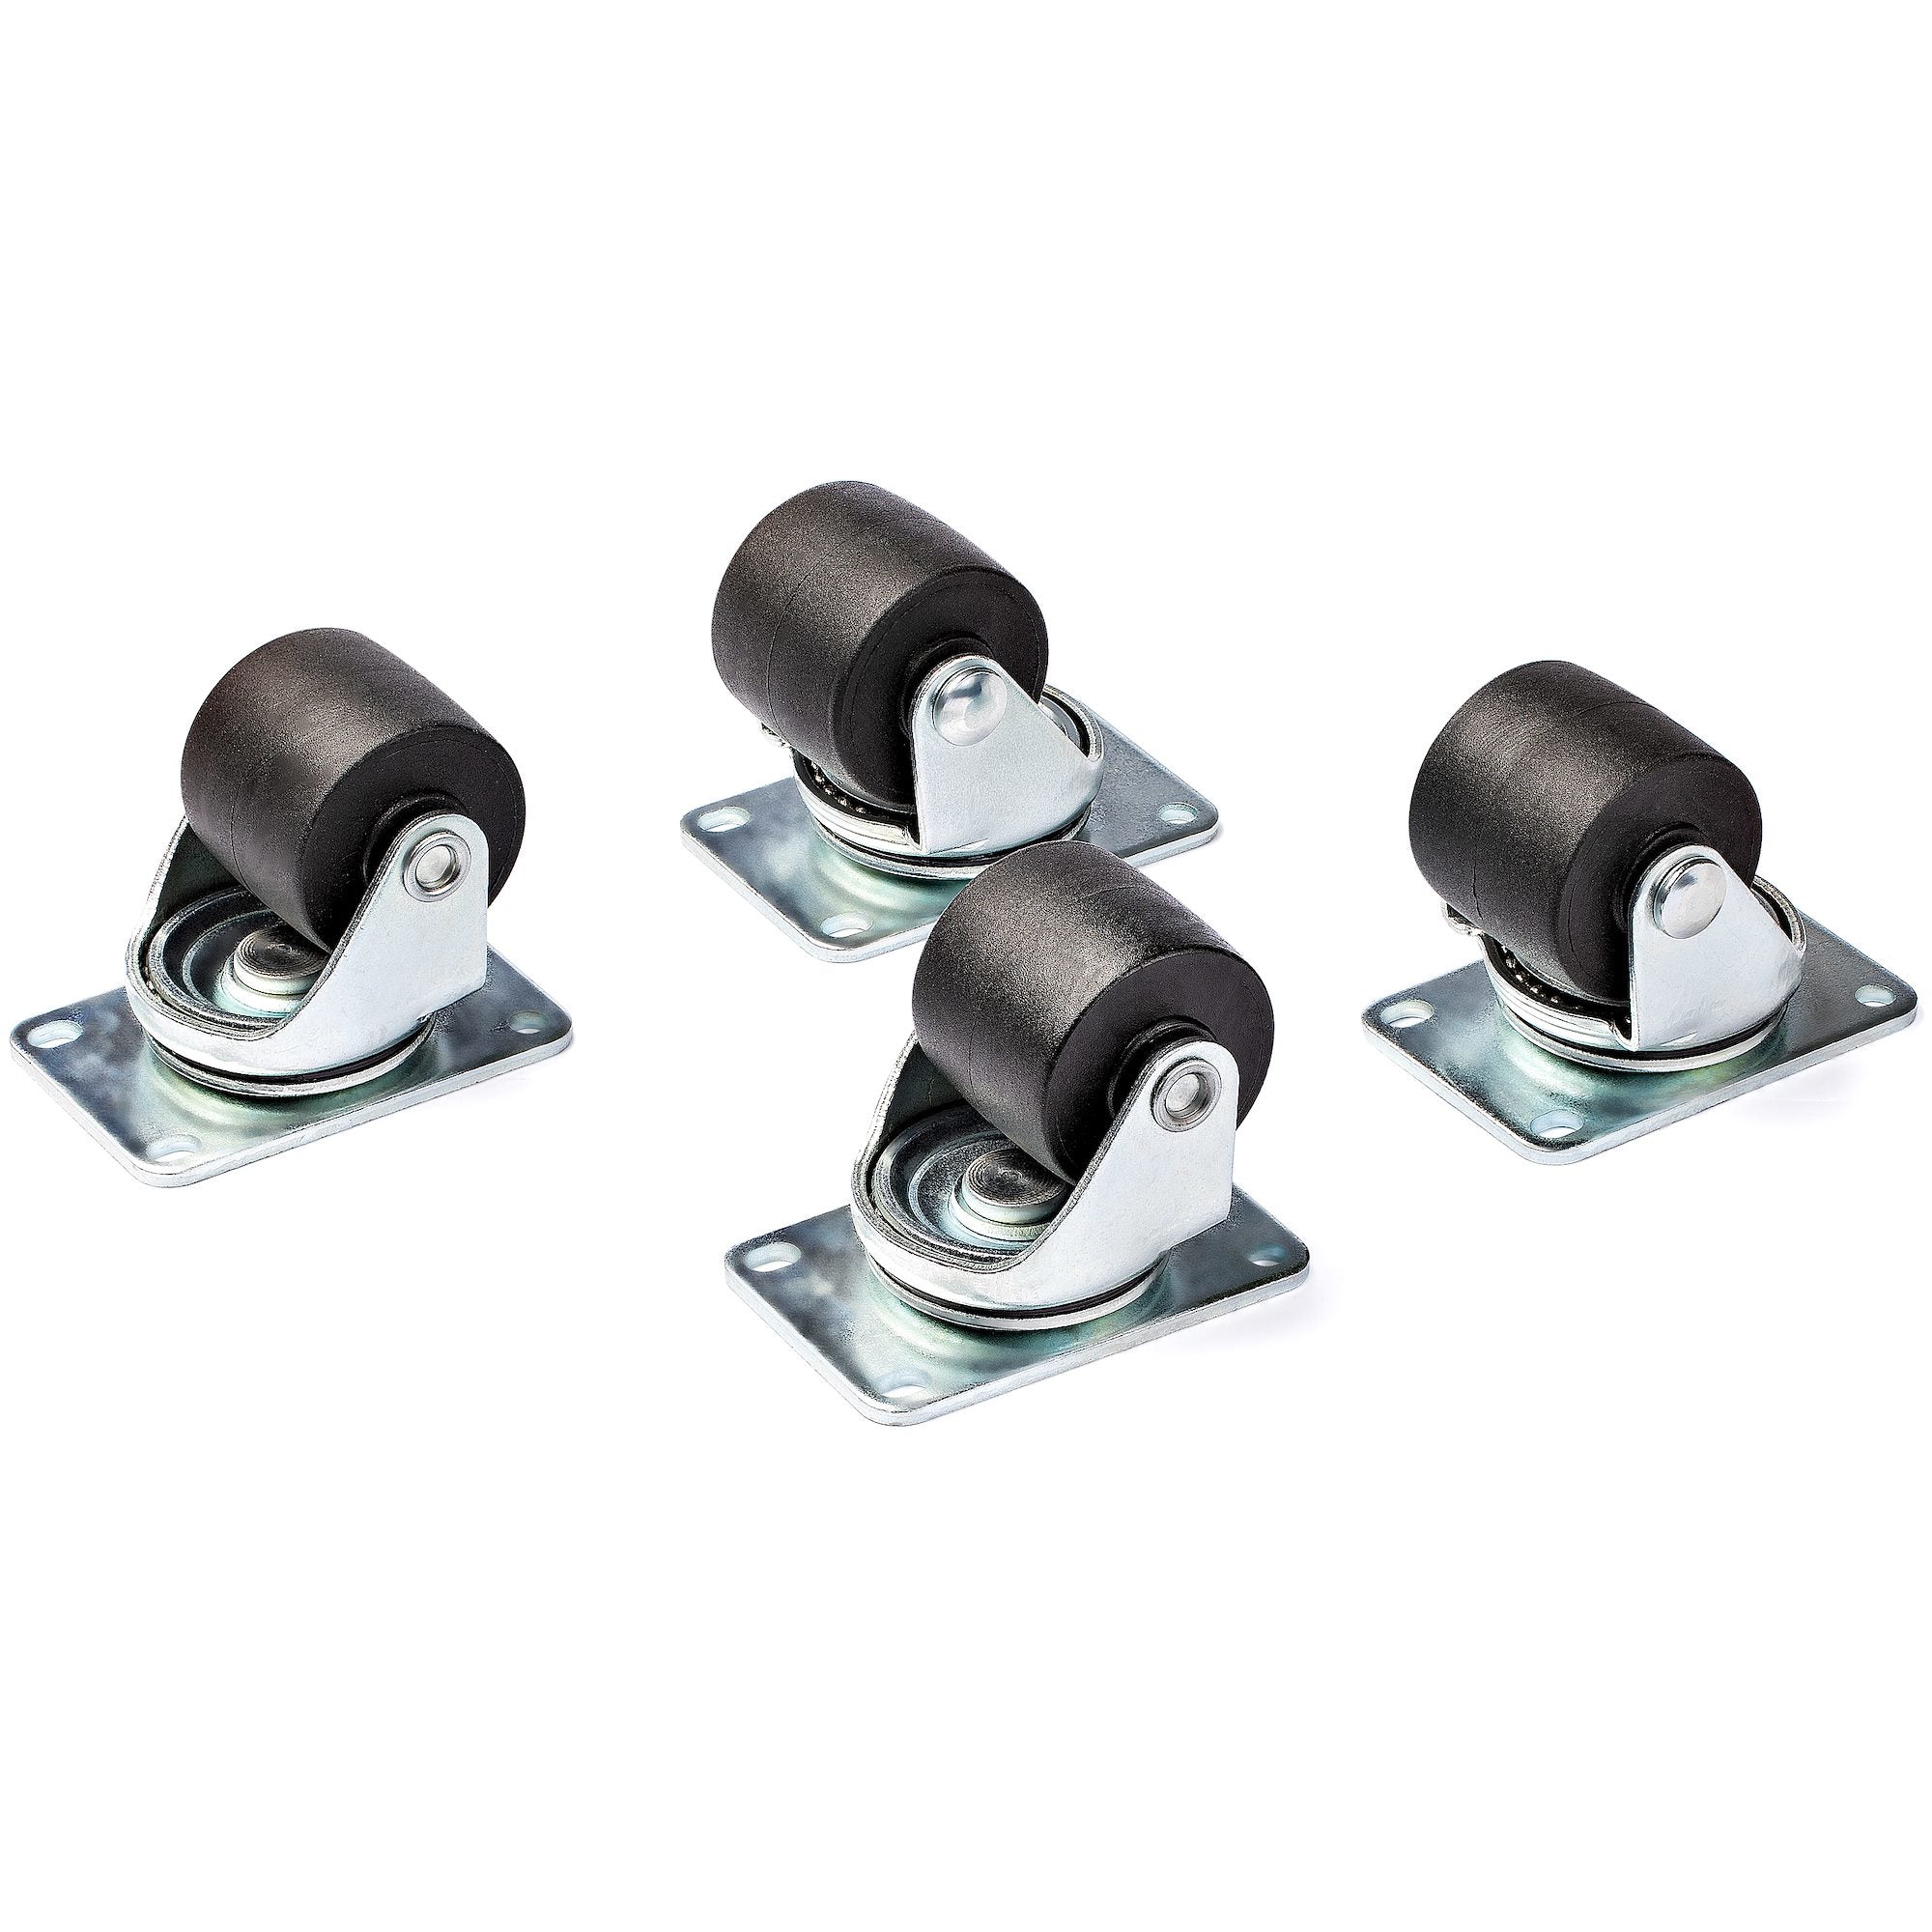 StarTech.com Heavy Duty Casters for Server Racks/Cabinets - Set of 4 Universal M6 2-inch Caster Kit - Replacement Swivel Caster Wheels (45x75mm pattern) for 4 Post Racks - Steel/Plastic